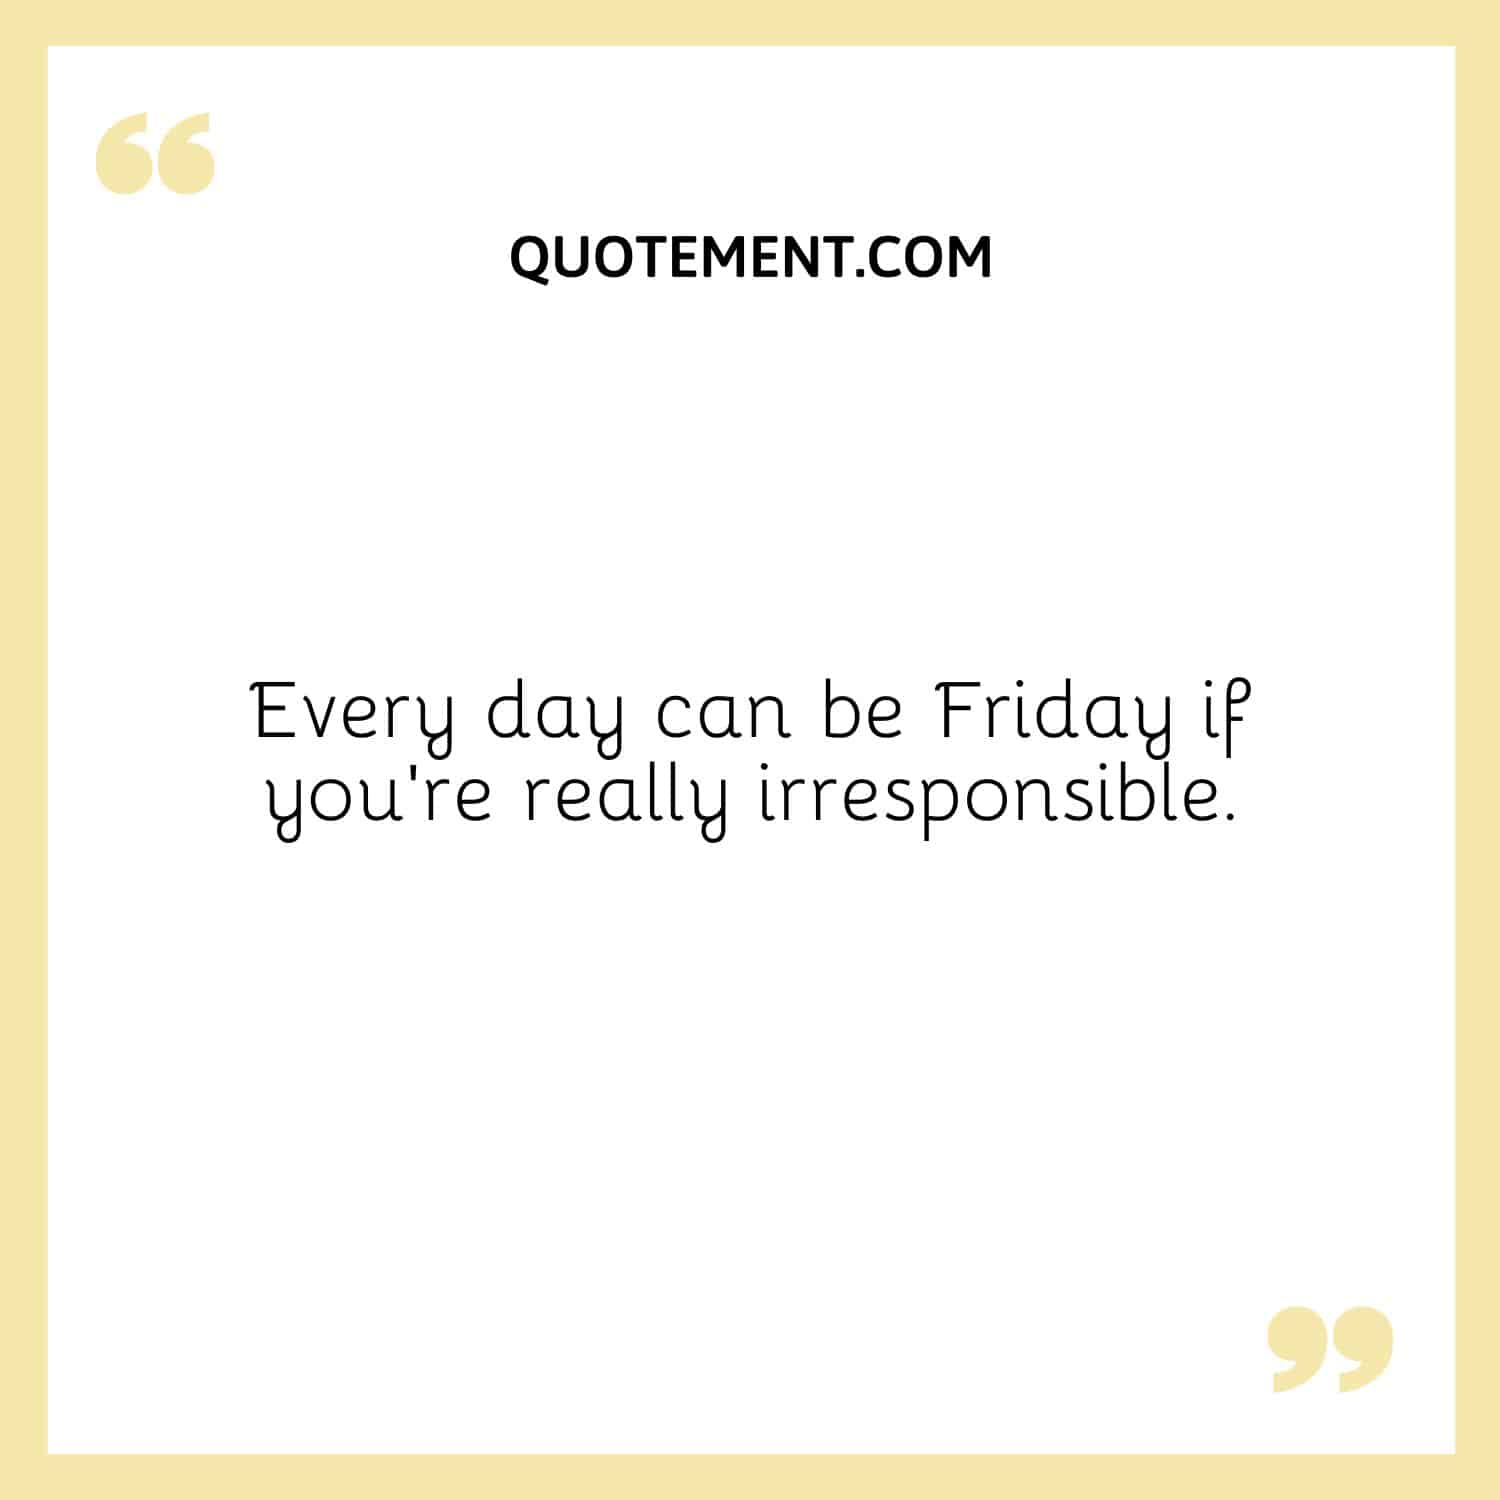 Every day can be Friday if you’re really irresponsible